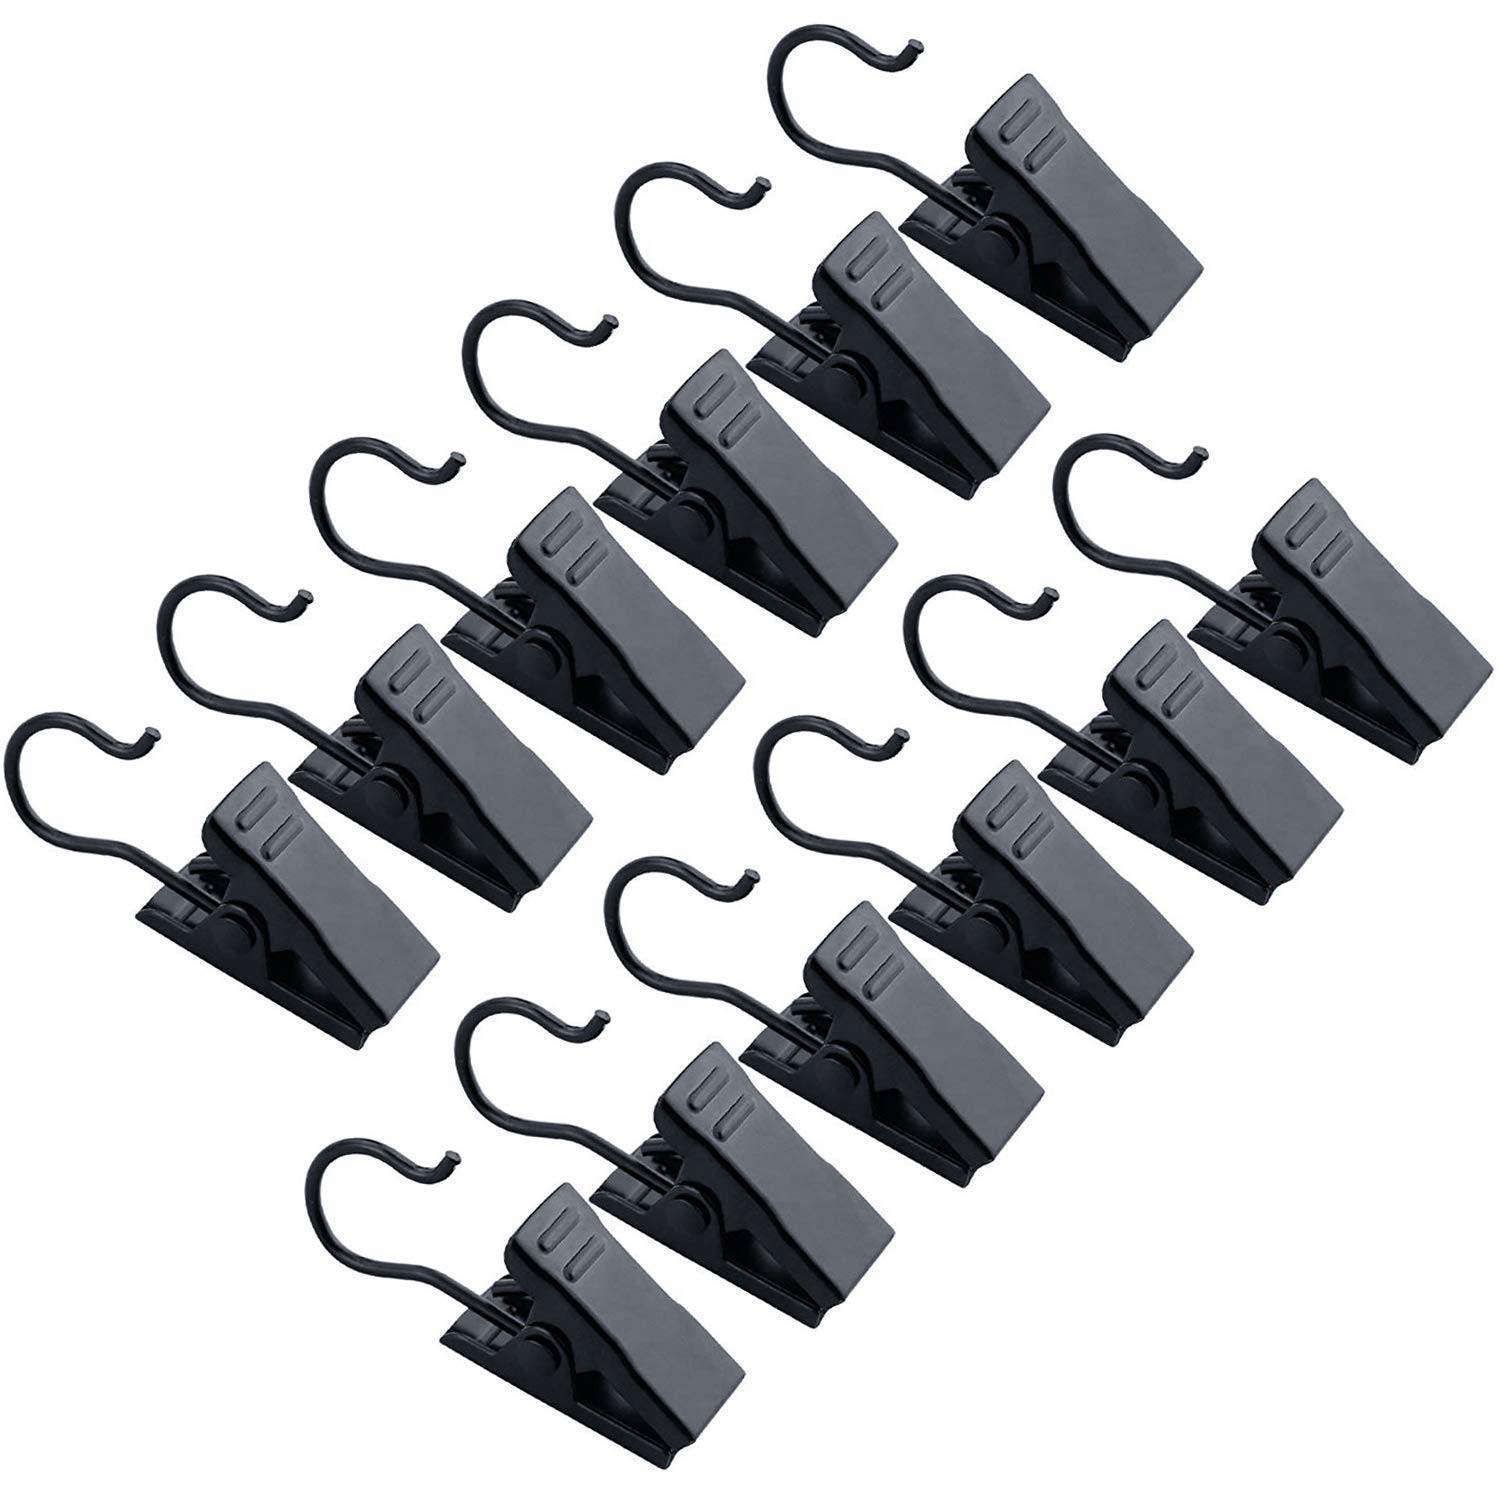 JANYUN 30 Pack Small Heavy-Duty Hook Clip Set Metal Curtain Hangers Clips for Clip Photo Home Decoration Art Craft Display - Black